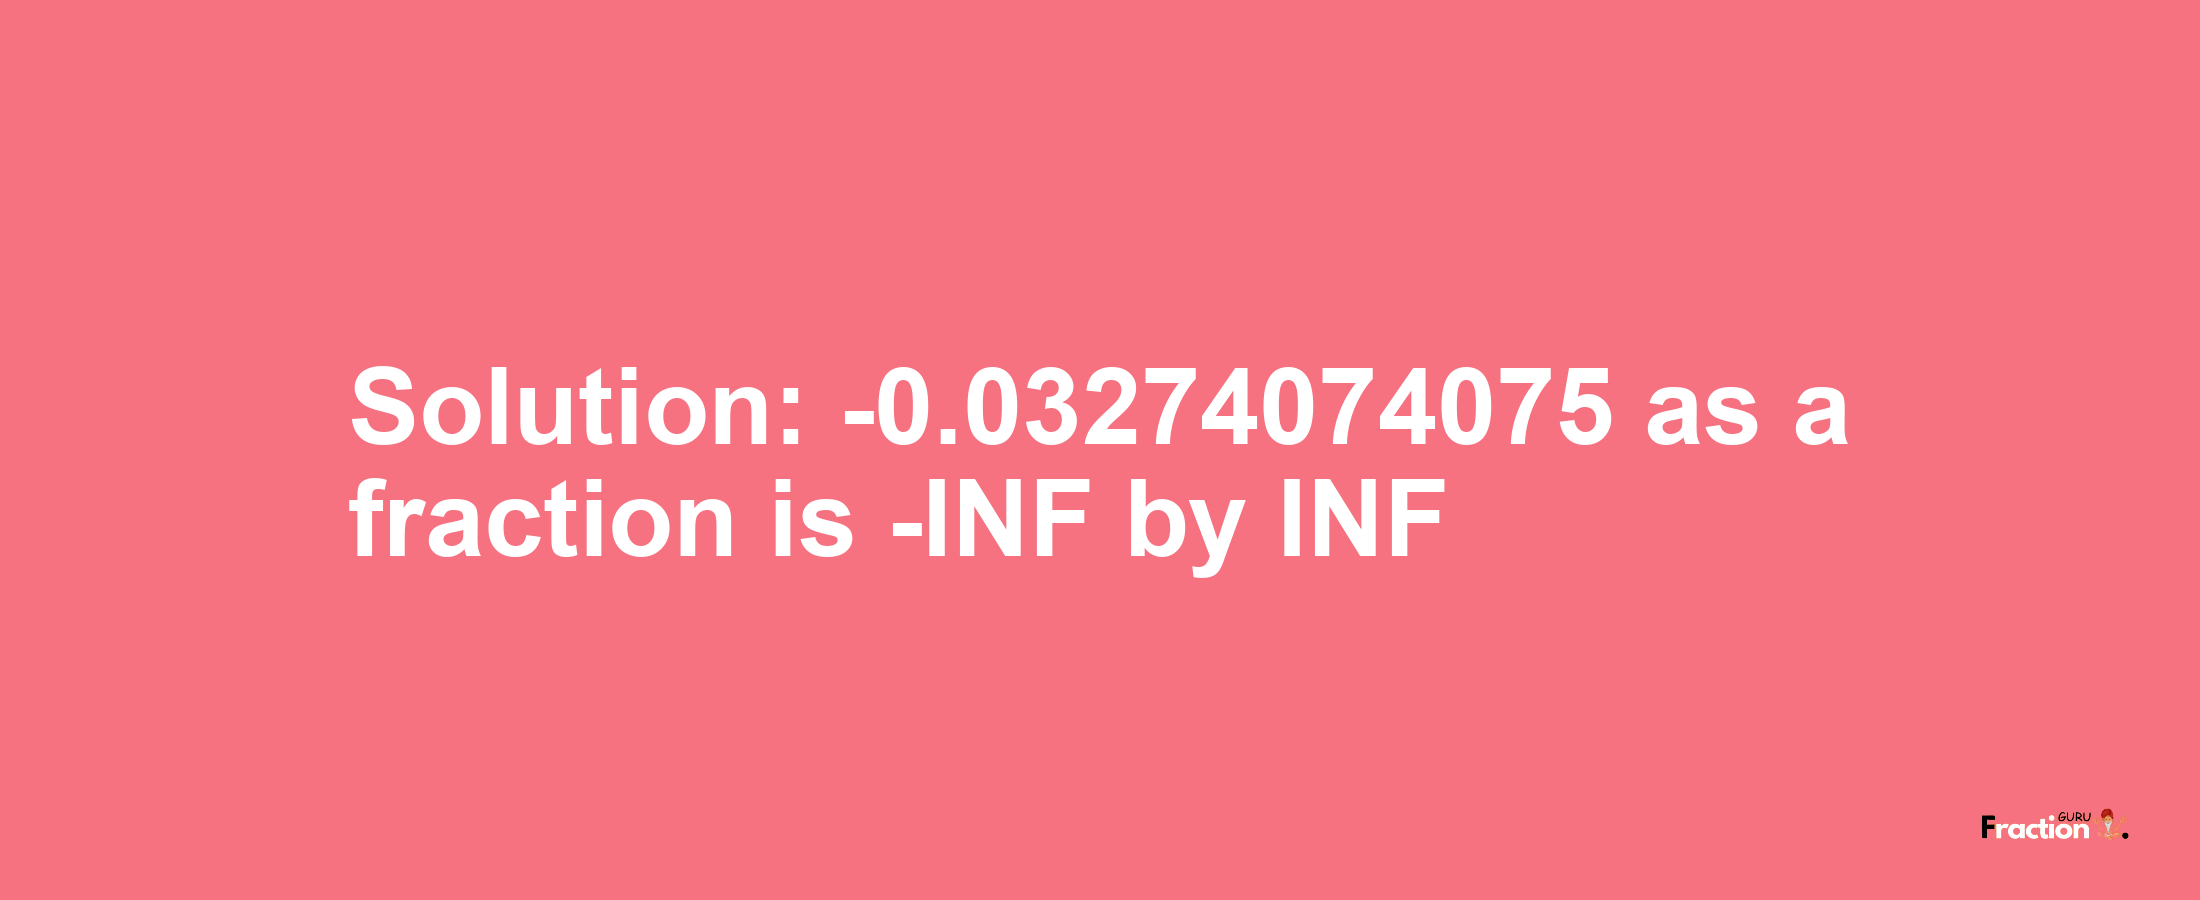 Solution:-0.03274074075 as a fraction is -INF/INF